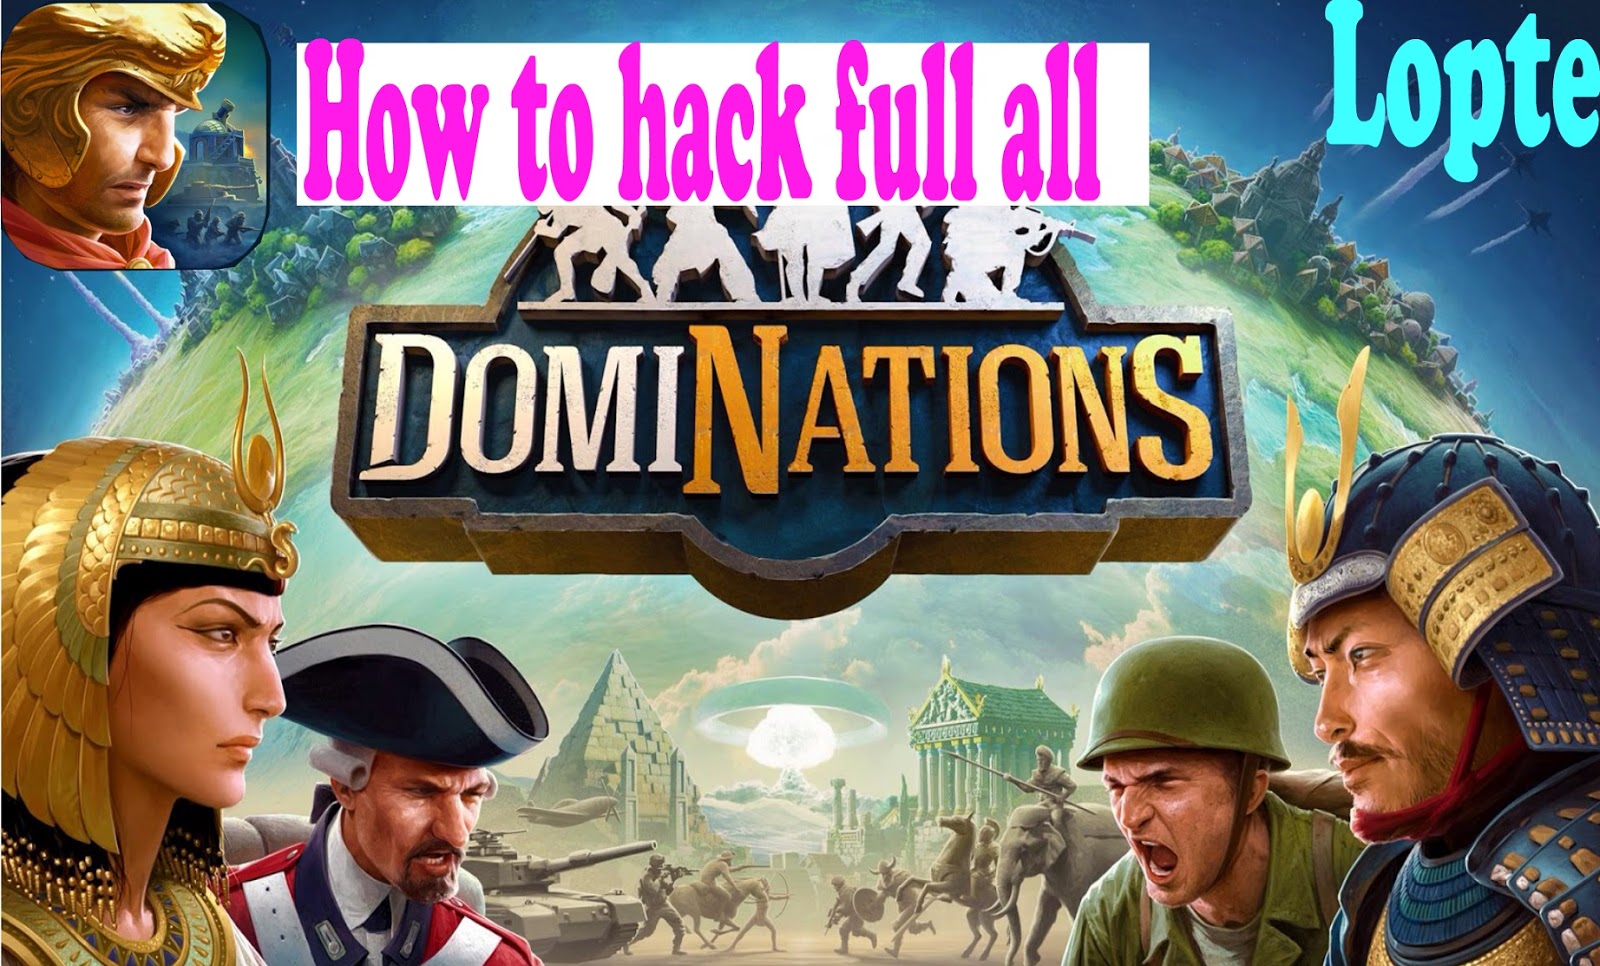 Download Hack Game Hot - DomiNations Hack Mod for iOS. The hottest online strategy game, bringing a new feeling for unforgettable players. With this hack, you will be updated with One Hit features, MOD Menu and many other new features waiting for you to explore ahead. Update all the latest hacks at TaiHack.Net. Download Game MOD APK DomiNations Hack Mod for iOS Free New Update.